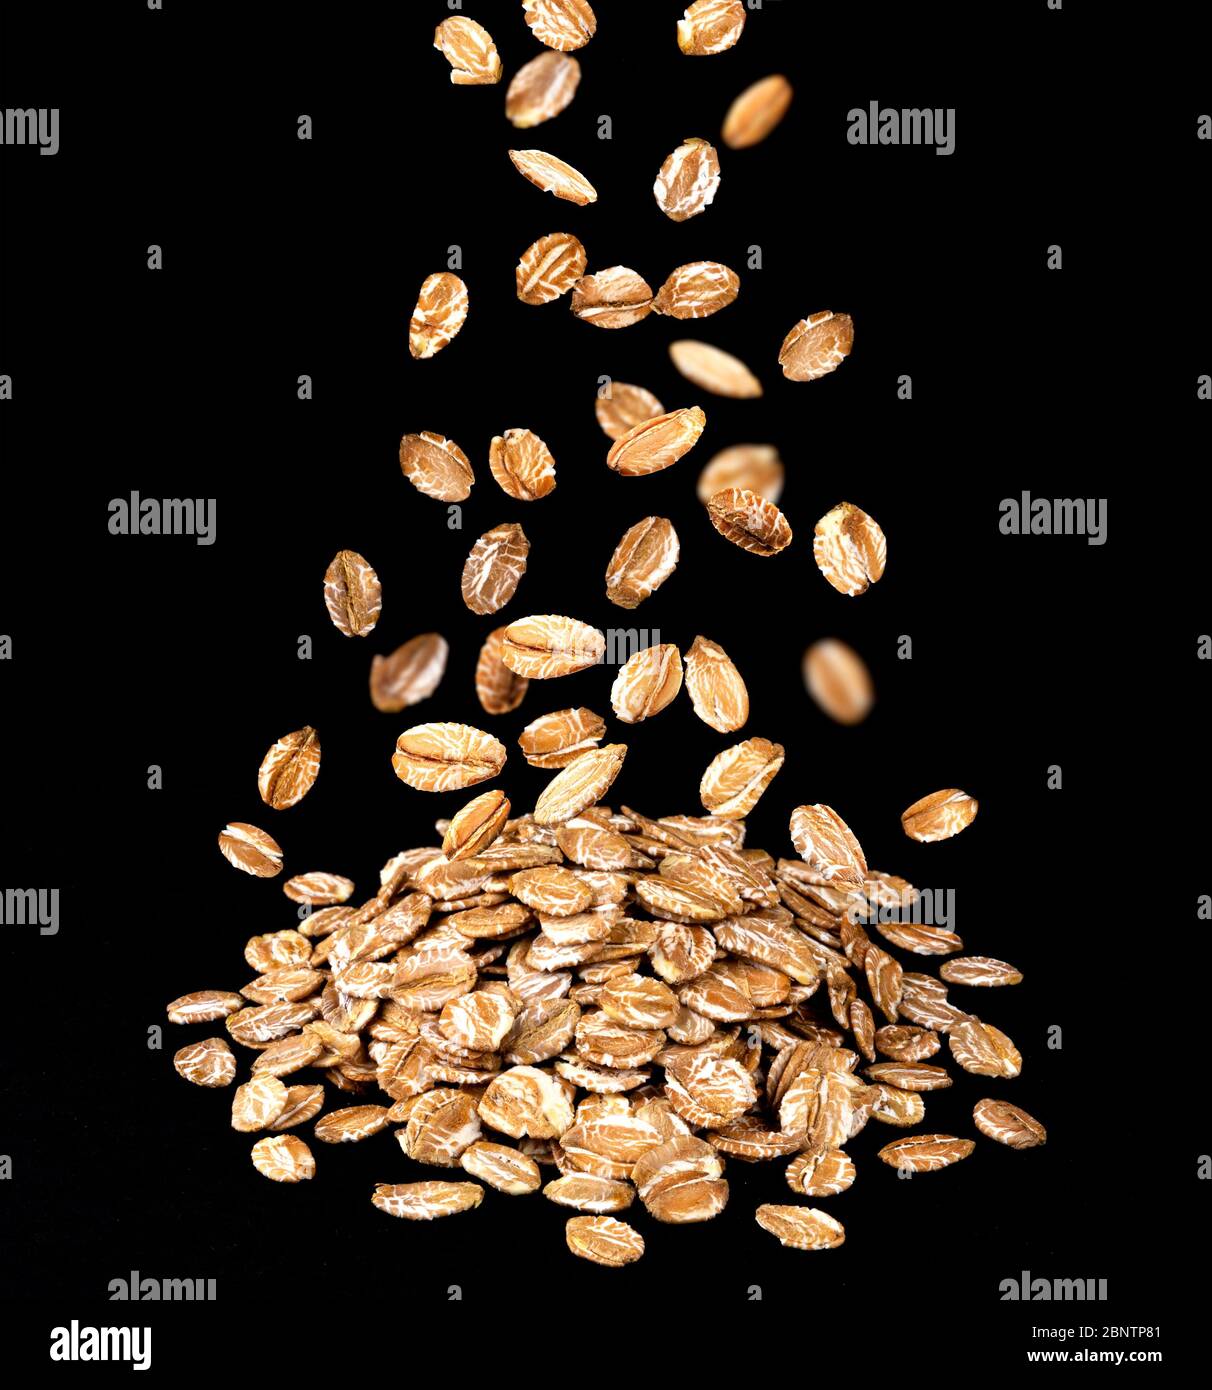 Heap of oat flakes isolated on black background Stock Photo